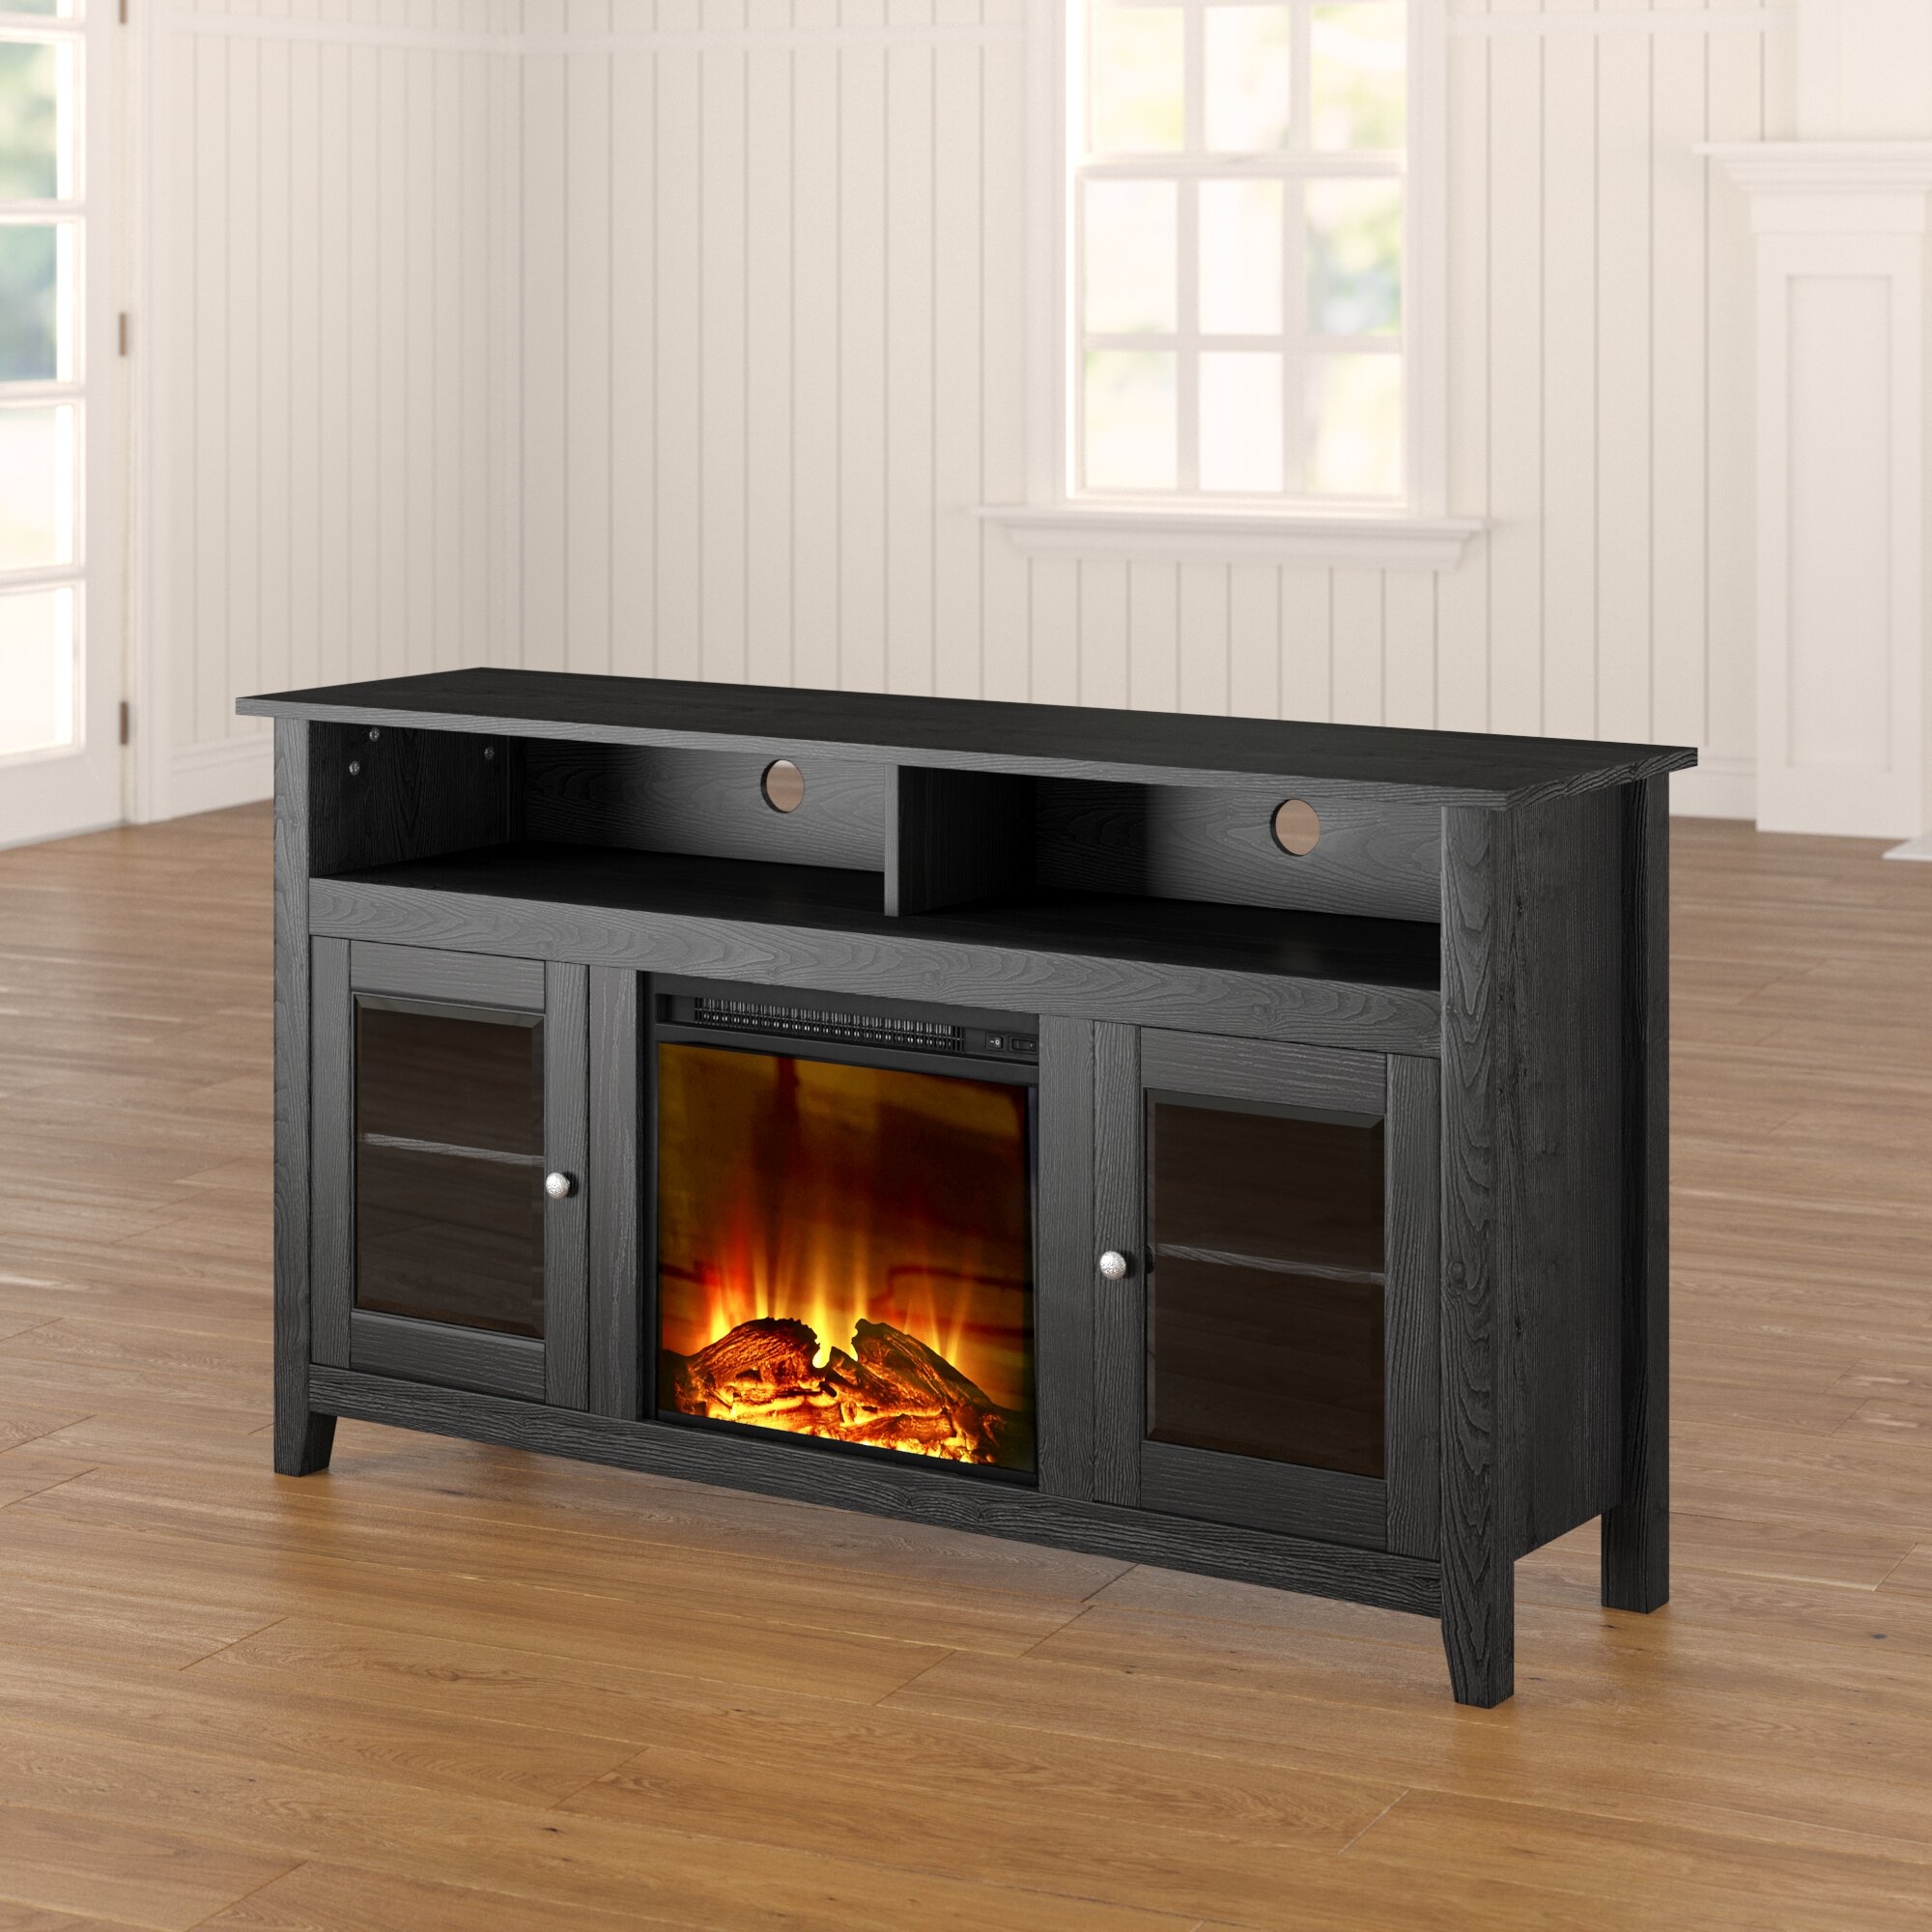 Kohn TV Stand for TVs up to 58" with Fireplace Included